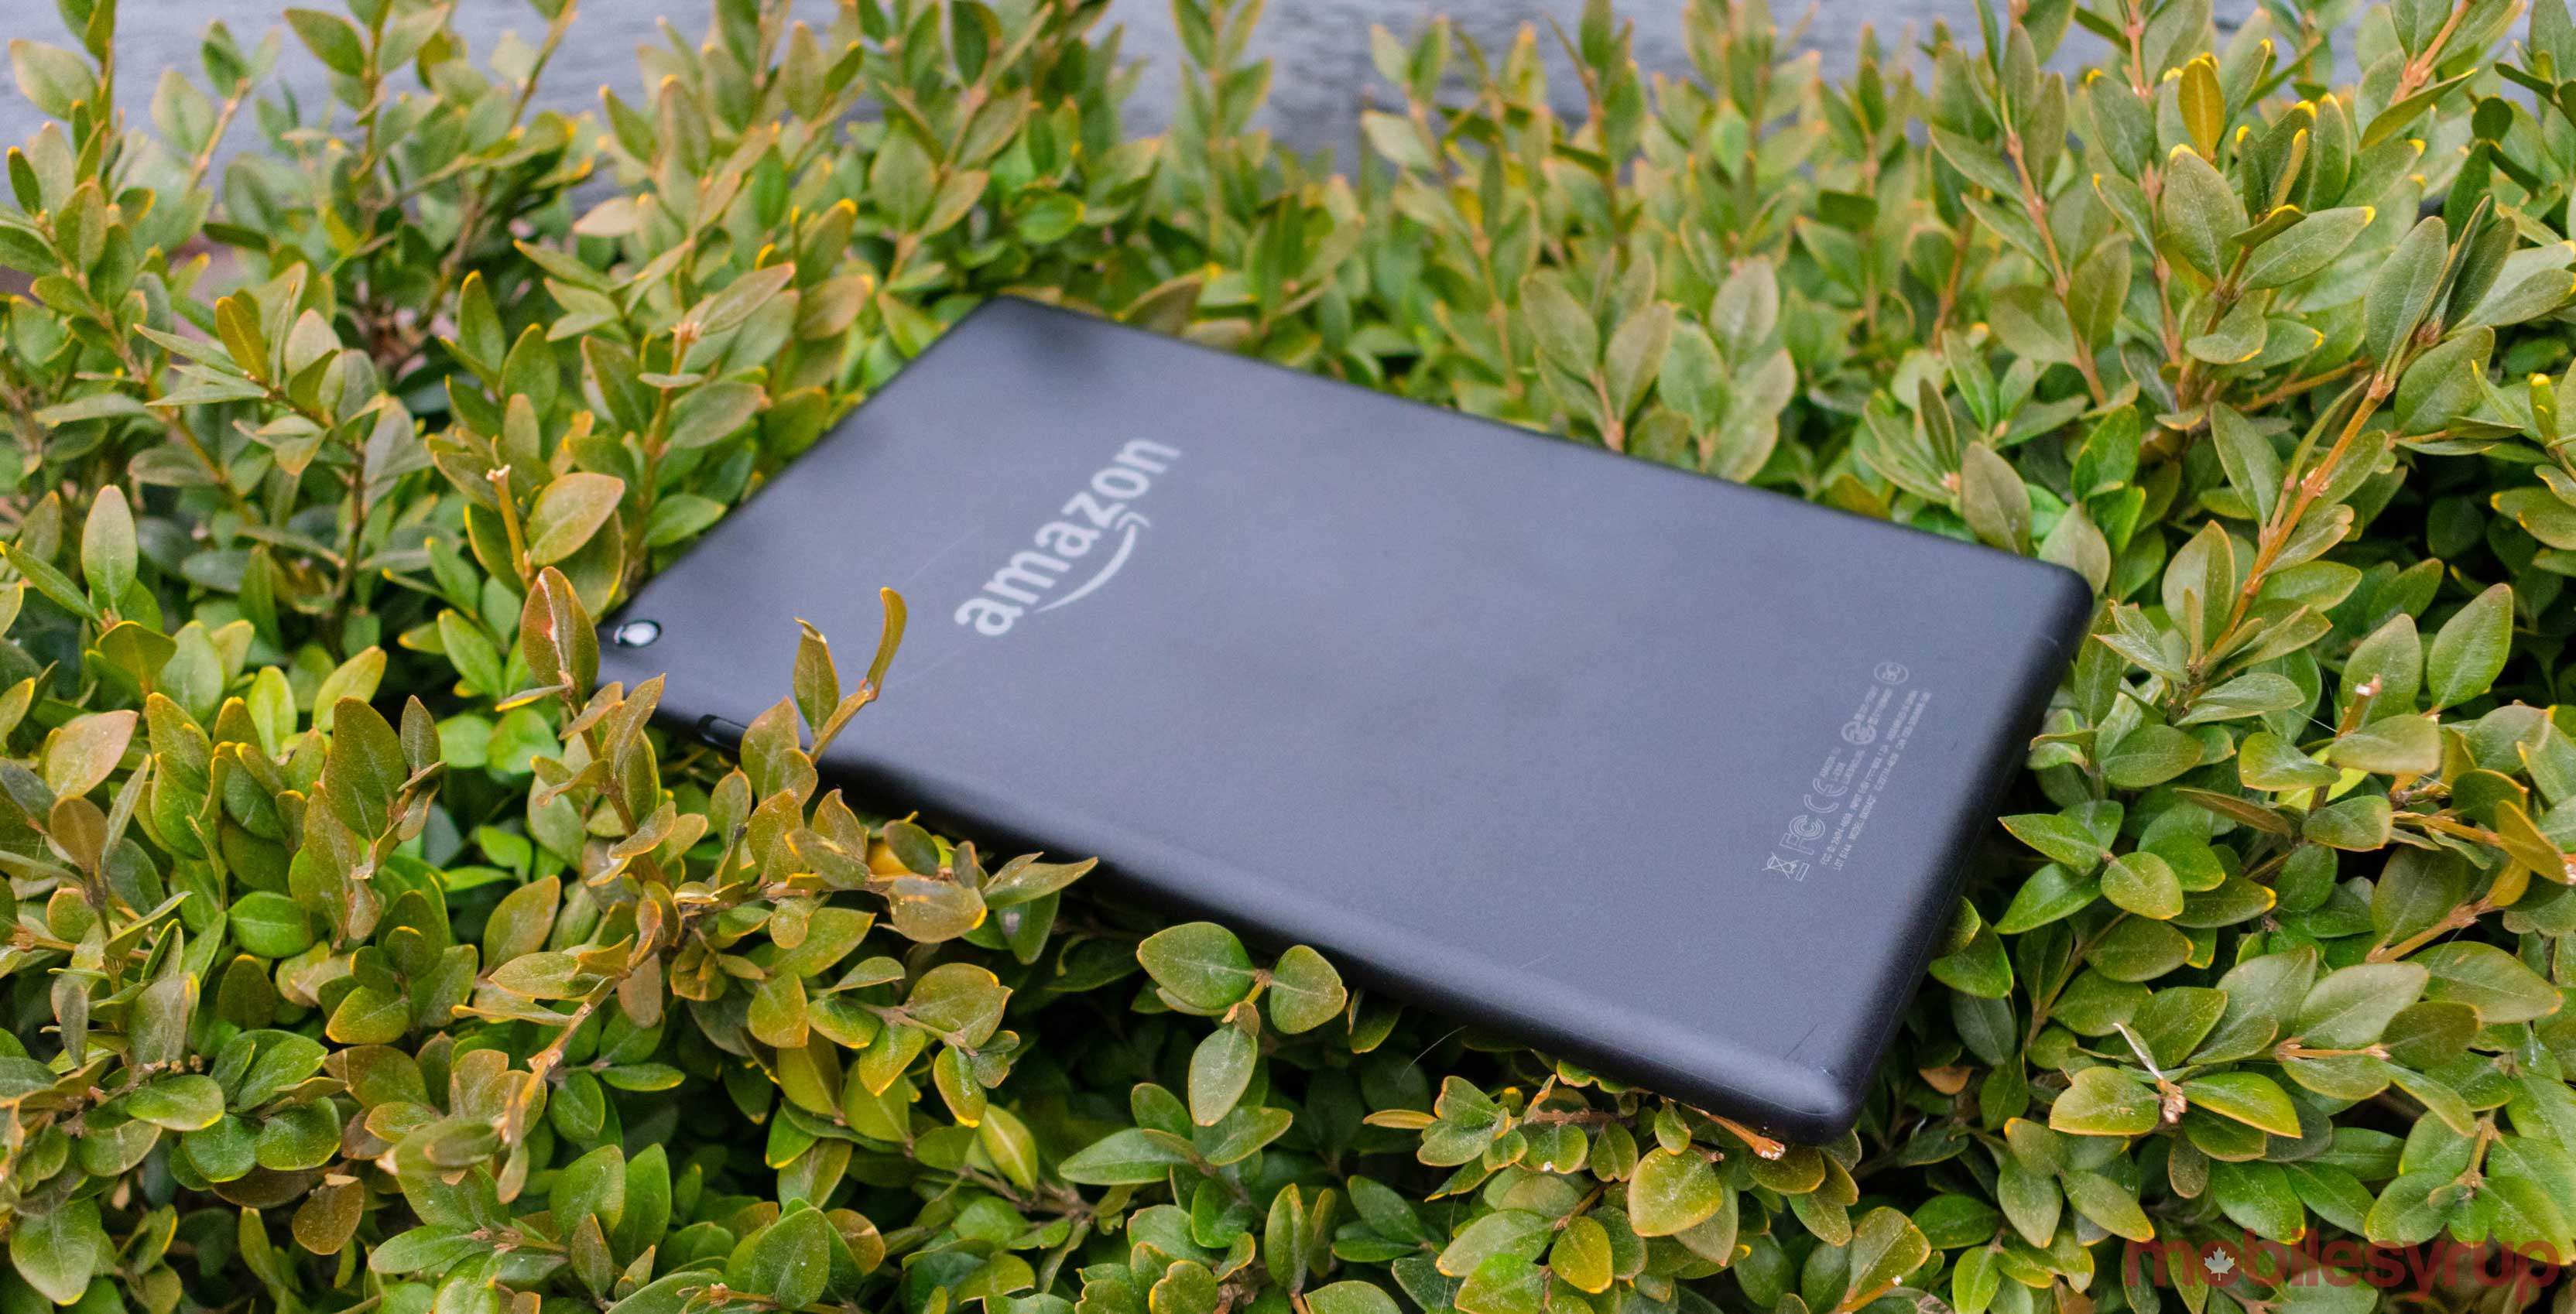 An Amazon tablet placed on a patch of grass.